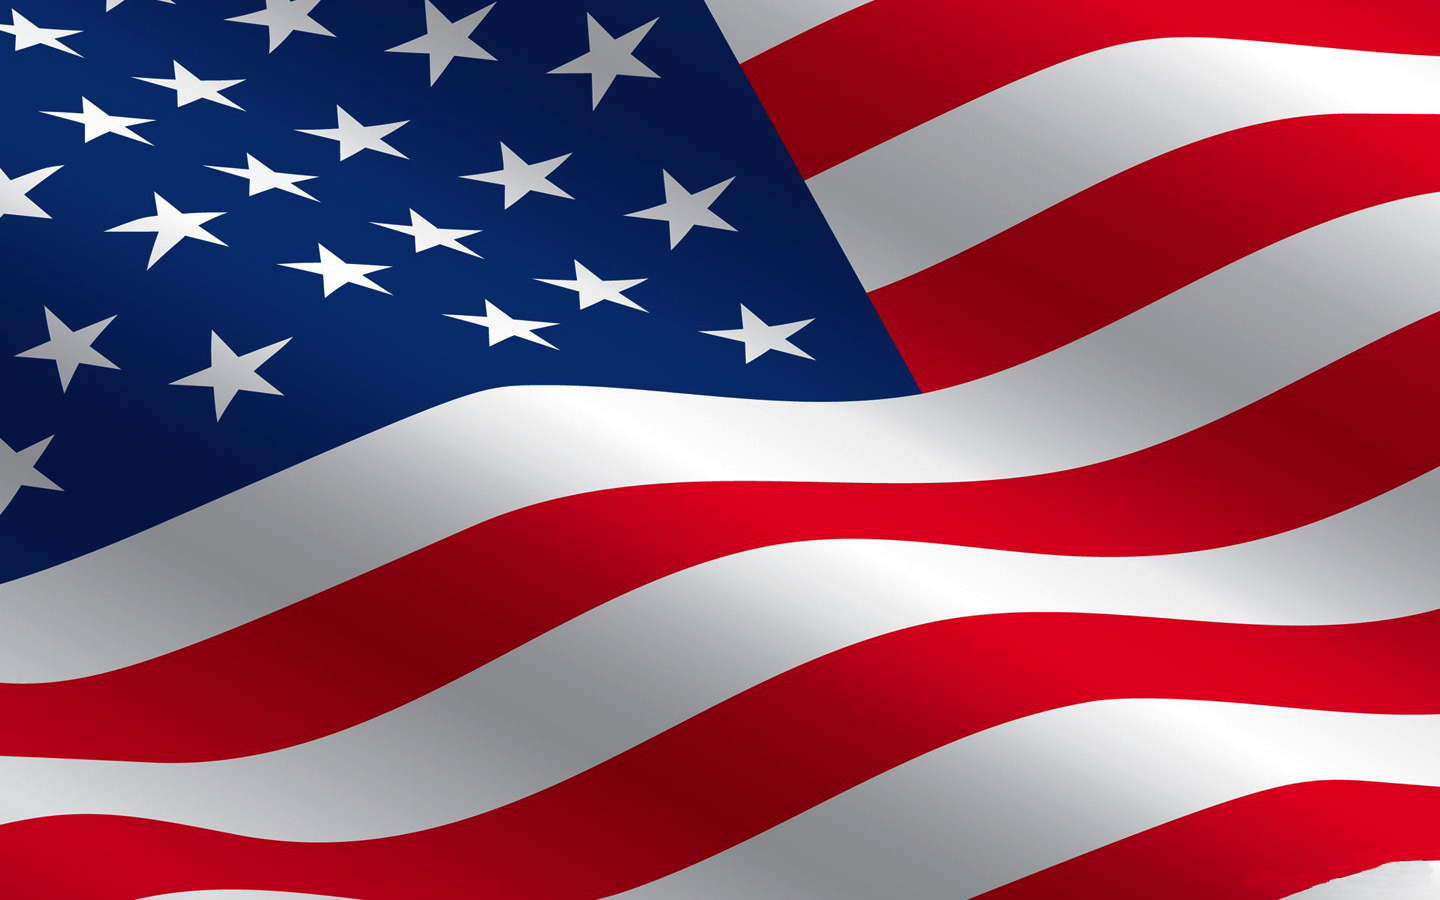 Us Flag 9336 Hd Wallpapers in Travel n World   Imagescicom 1440x900